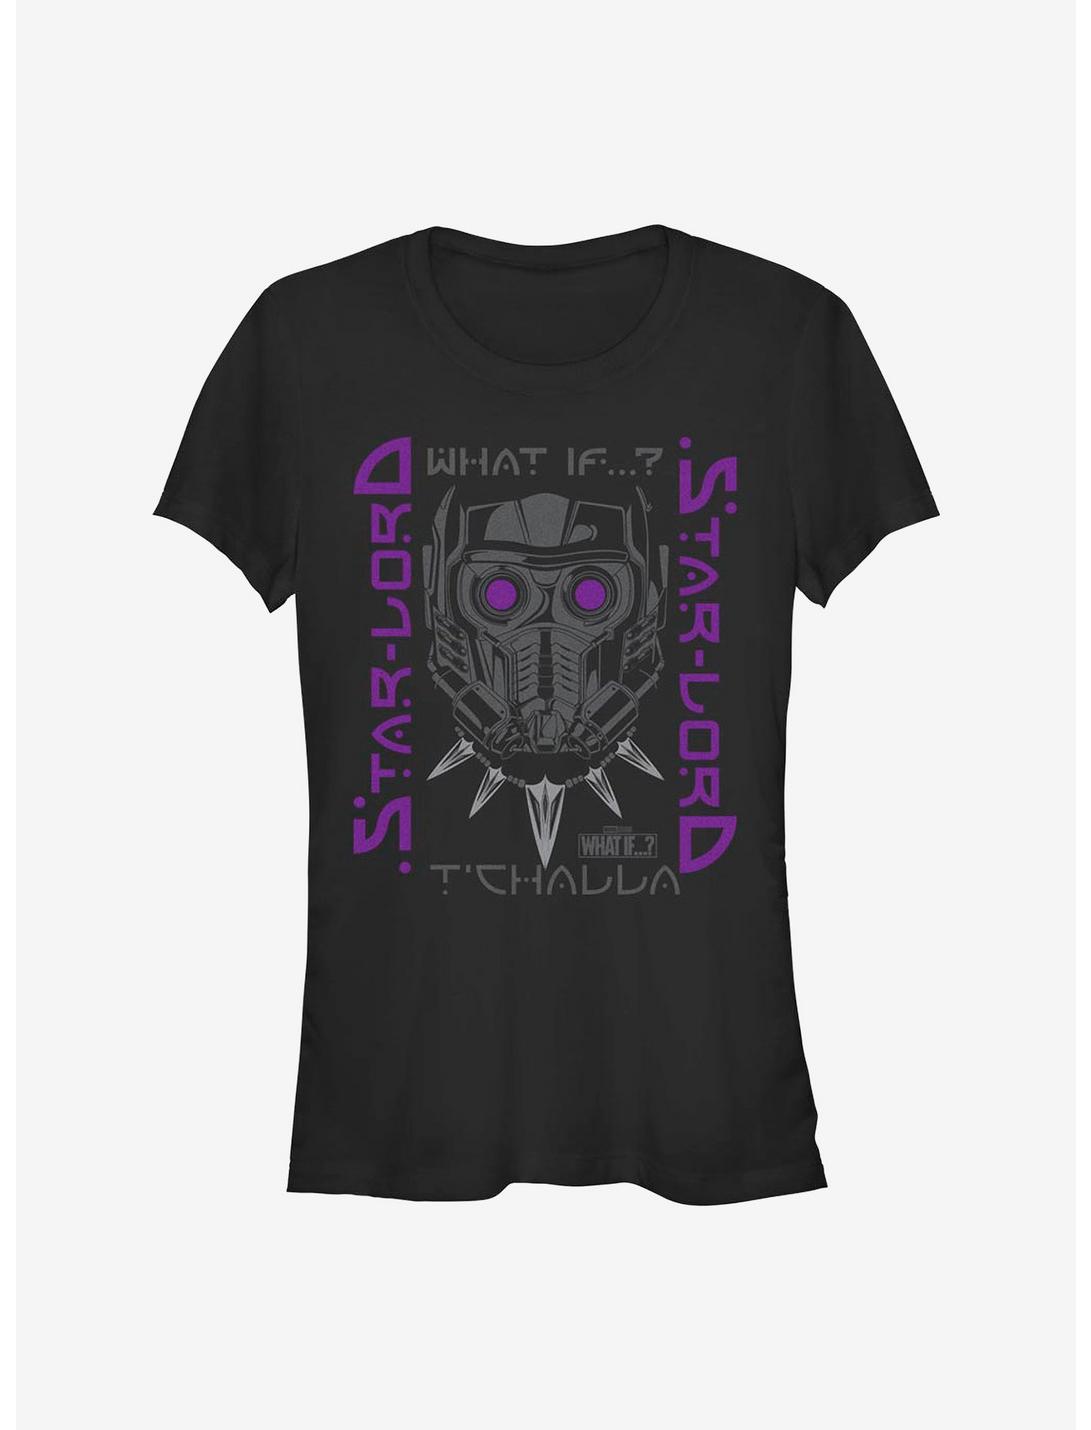 Marvel What If...? Star-Lord T'Challa Girls T-Shirt, BLACK, hi-res